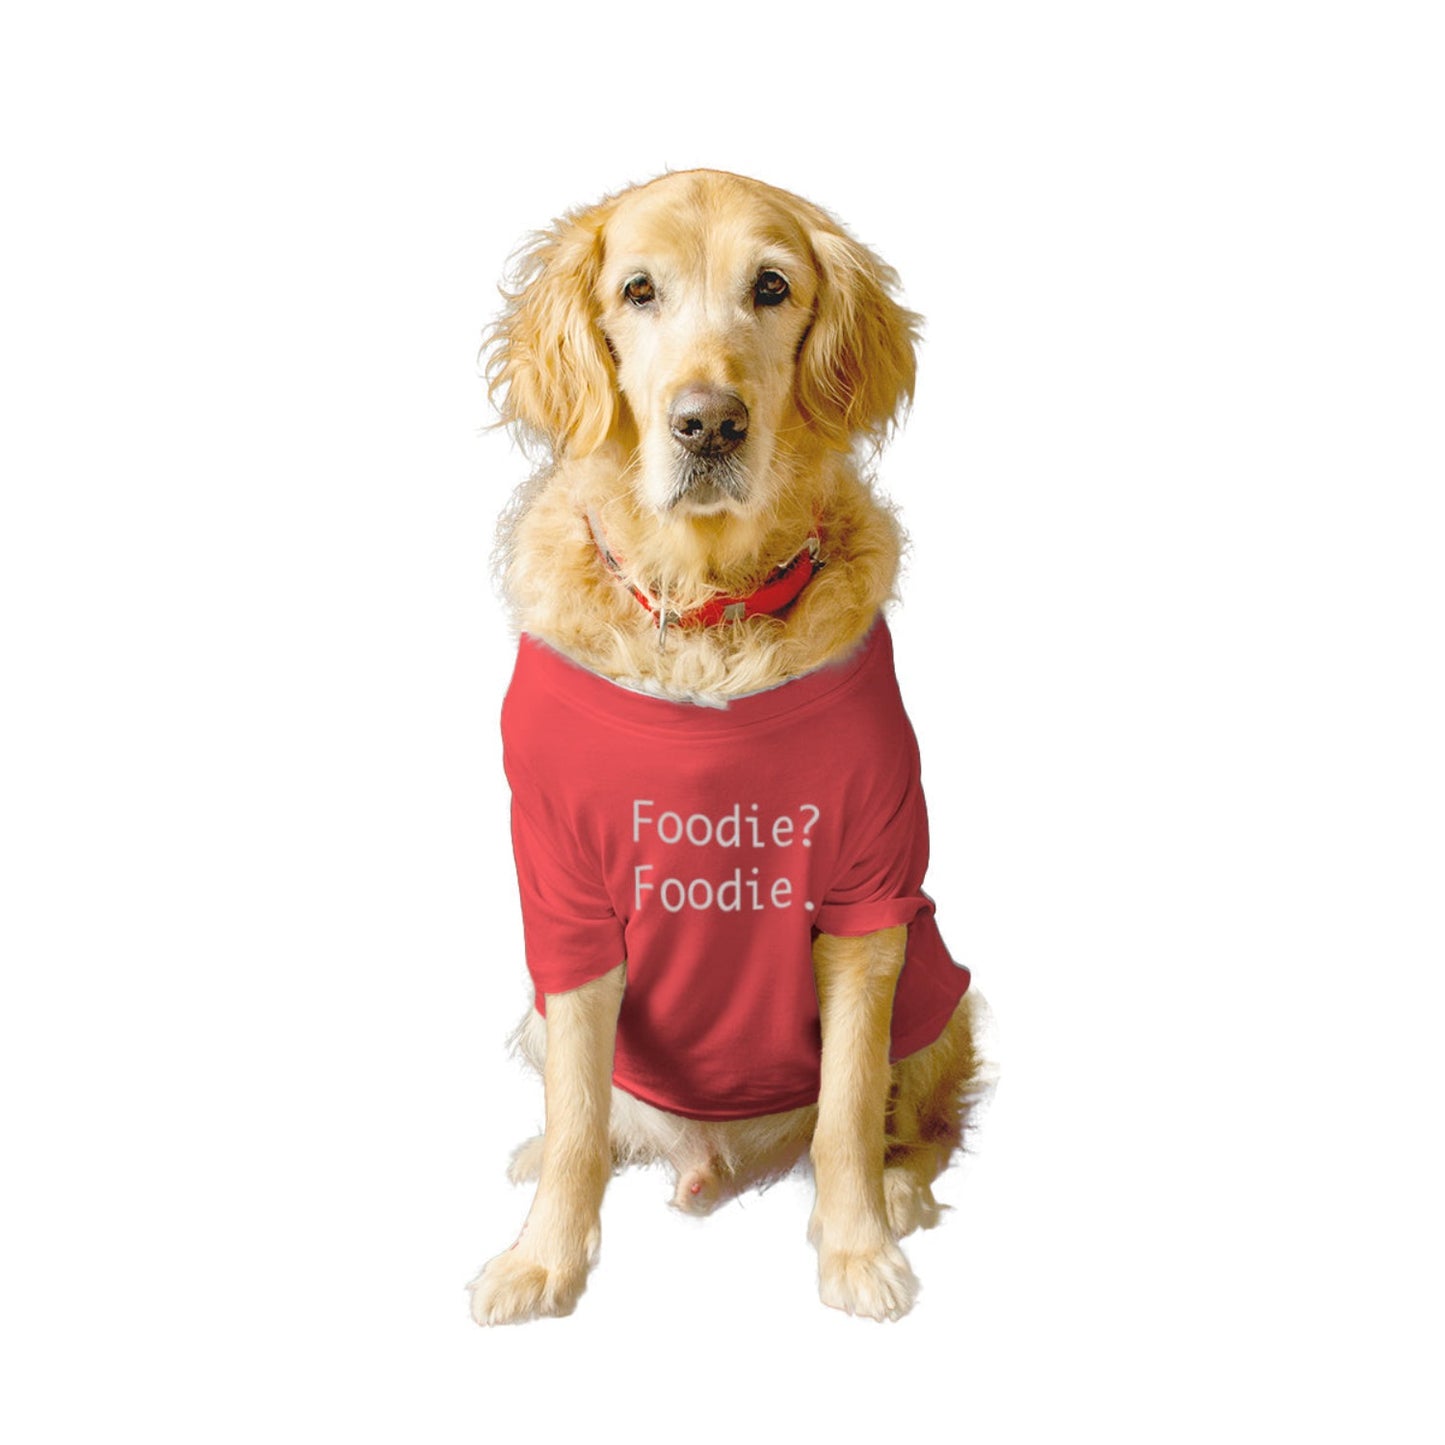 Ruse XX-Small (Chihuahuas, Papillons) / Poppy Red Ruse Basic Crew Neck "FOODIE? FOODIE." Printed Half Sleeves Dog Tee